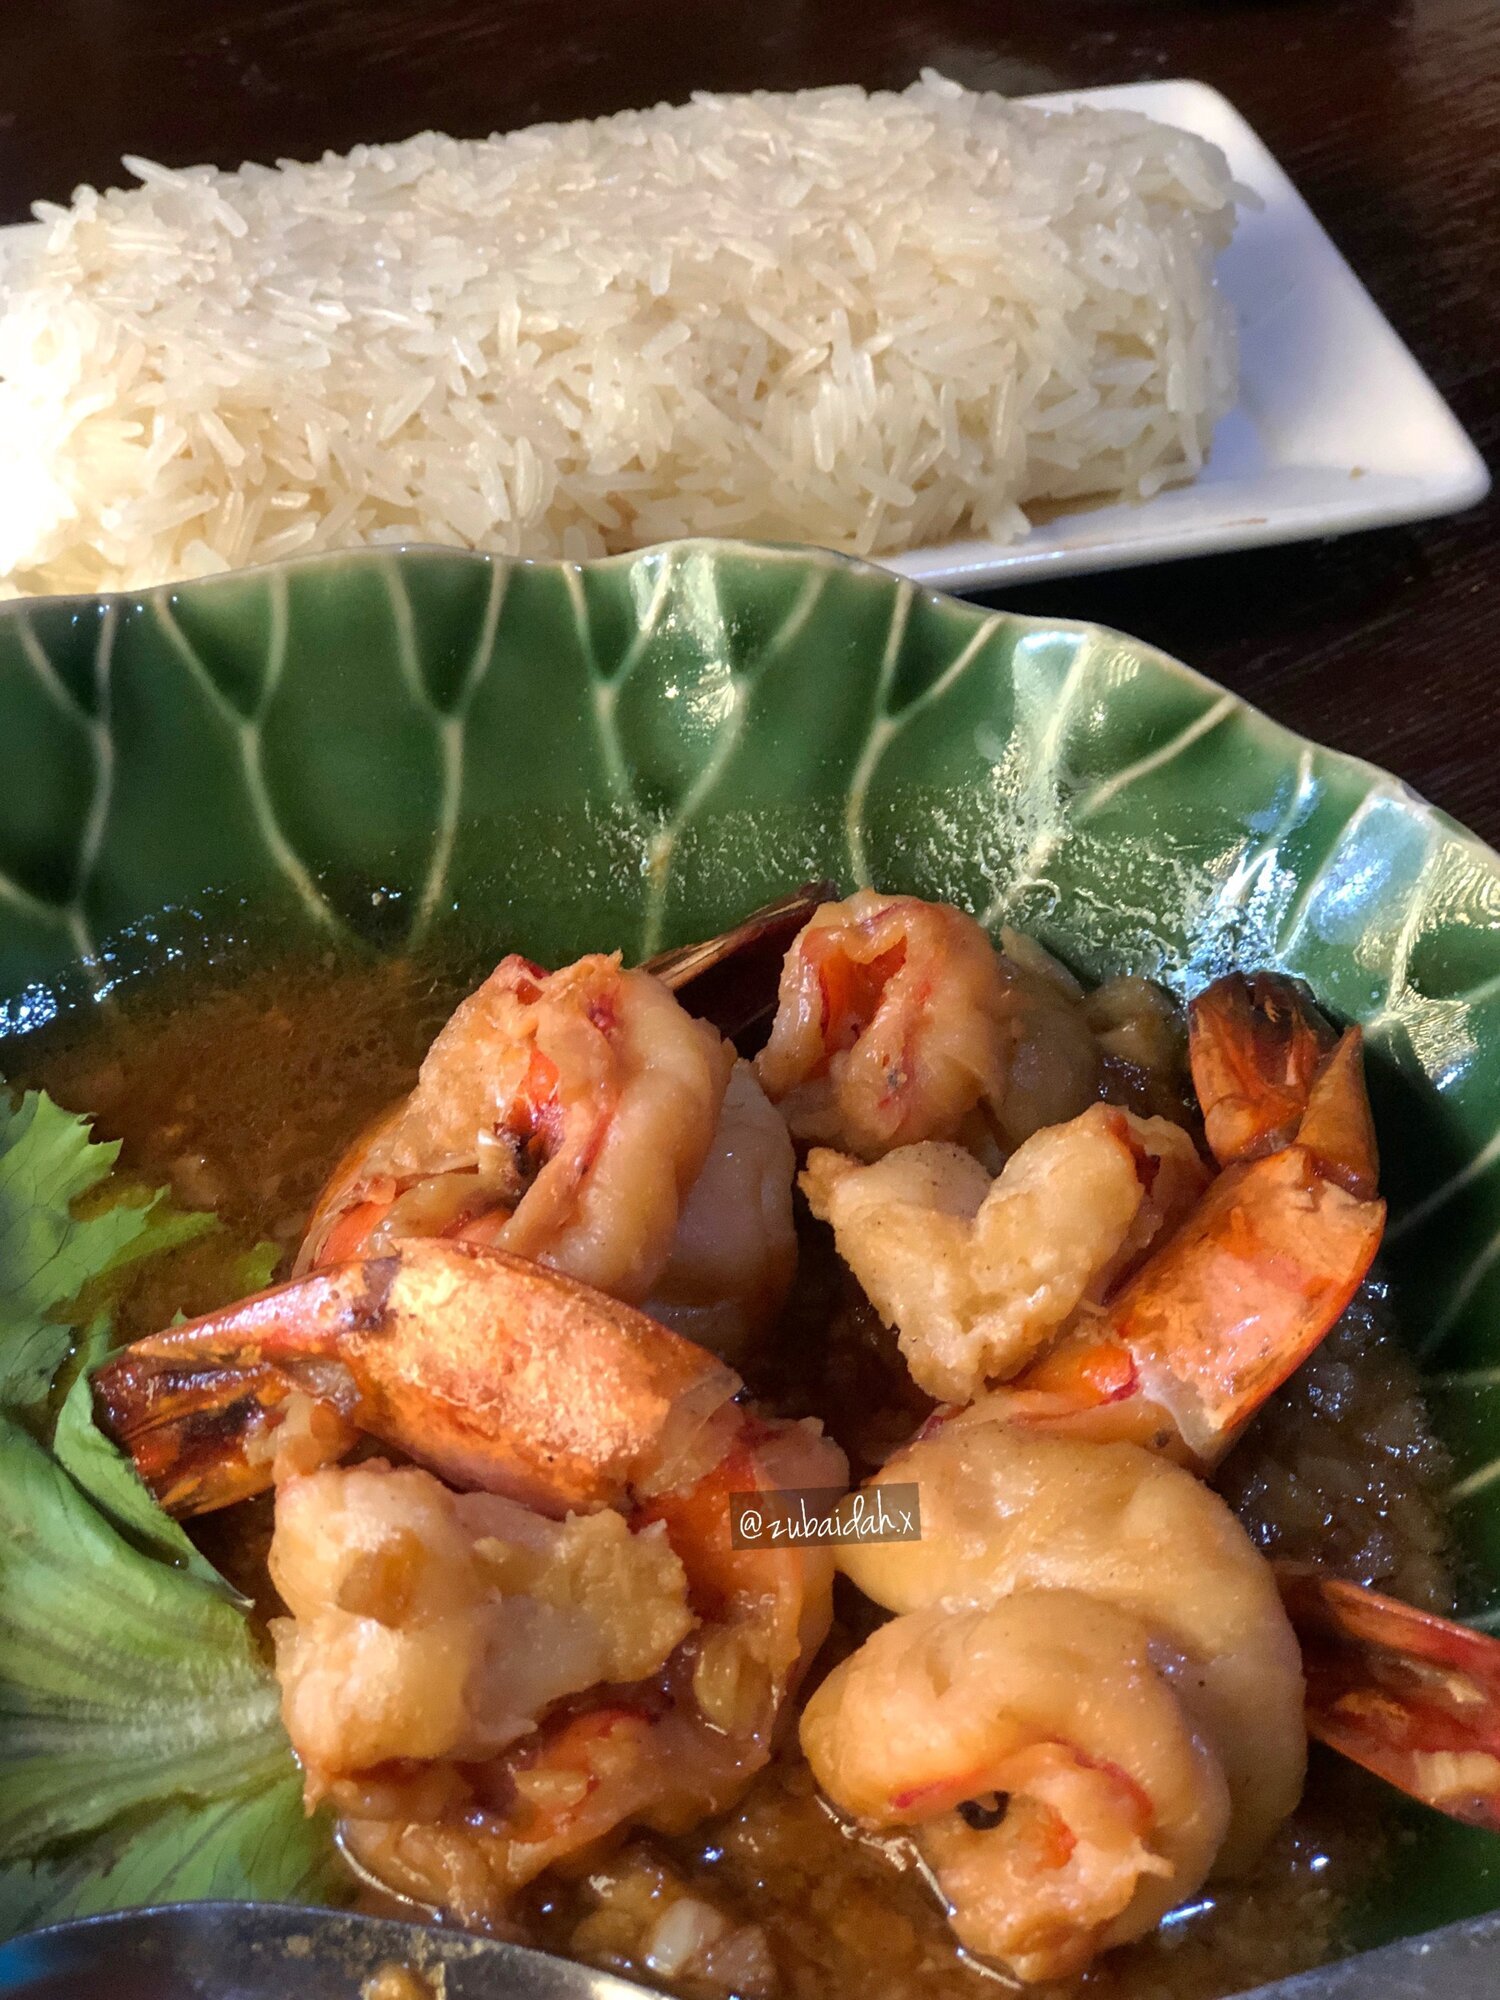 Gung Tod Krateam (Sautéed Shrimp with Garlic and White Pepper Sauce) with Sticky Rice